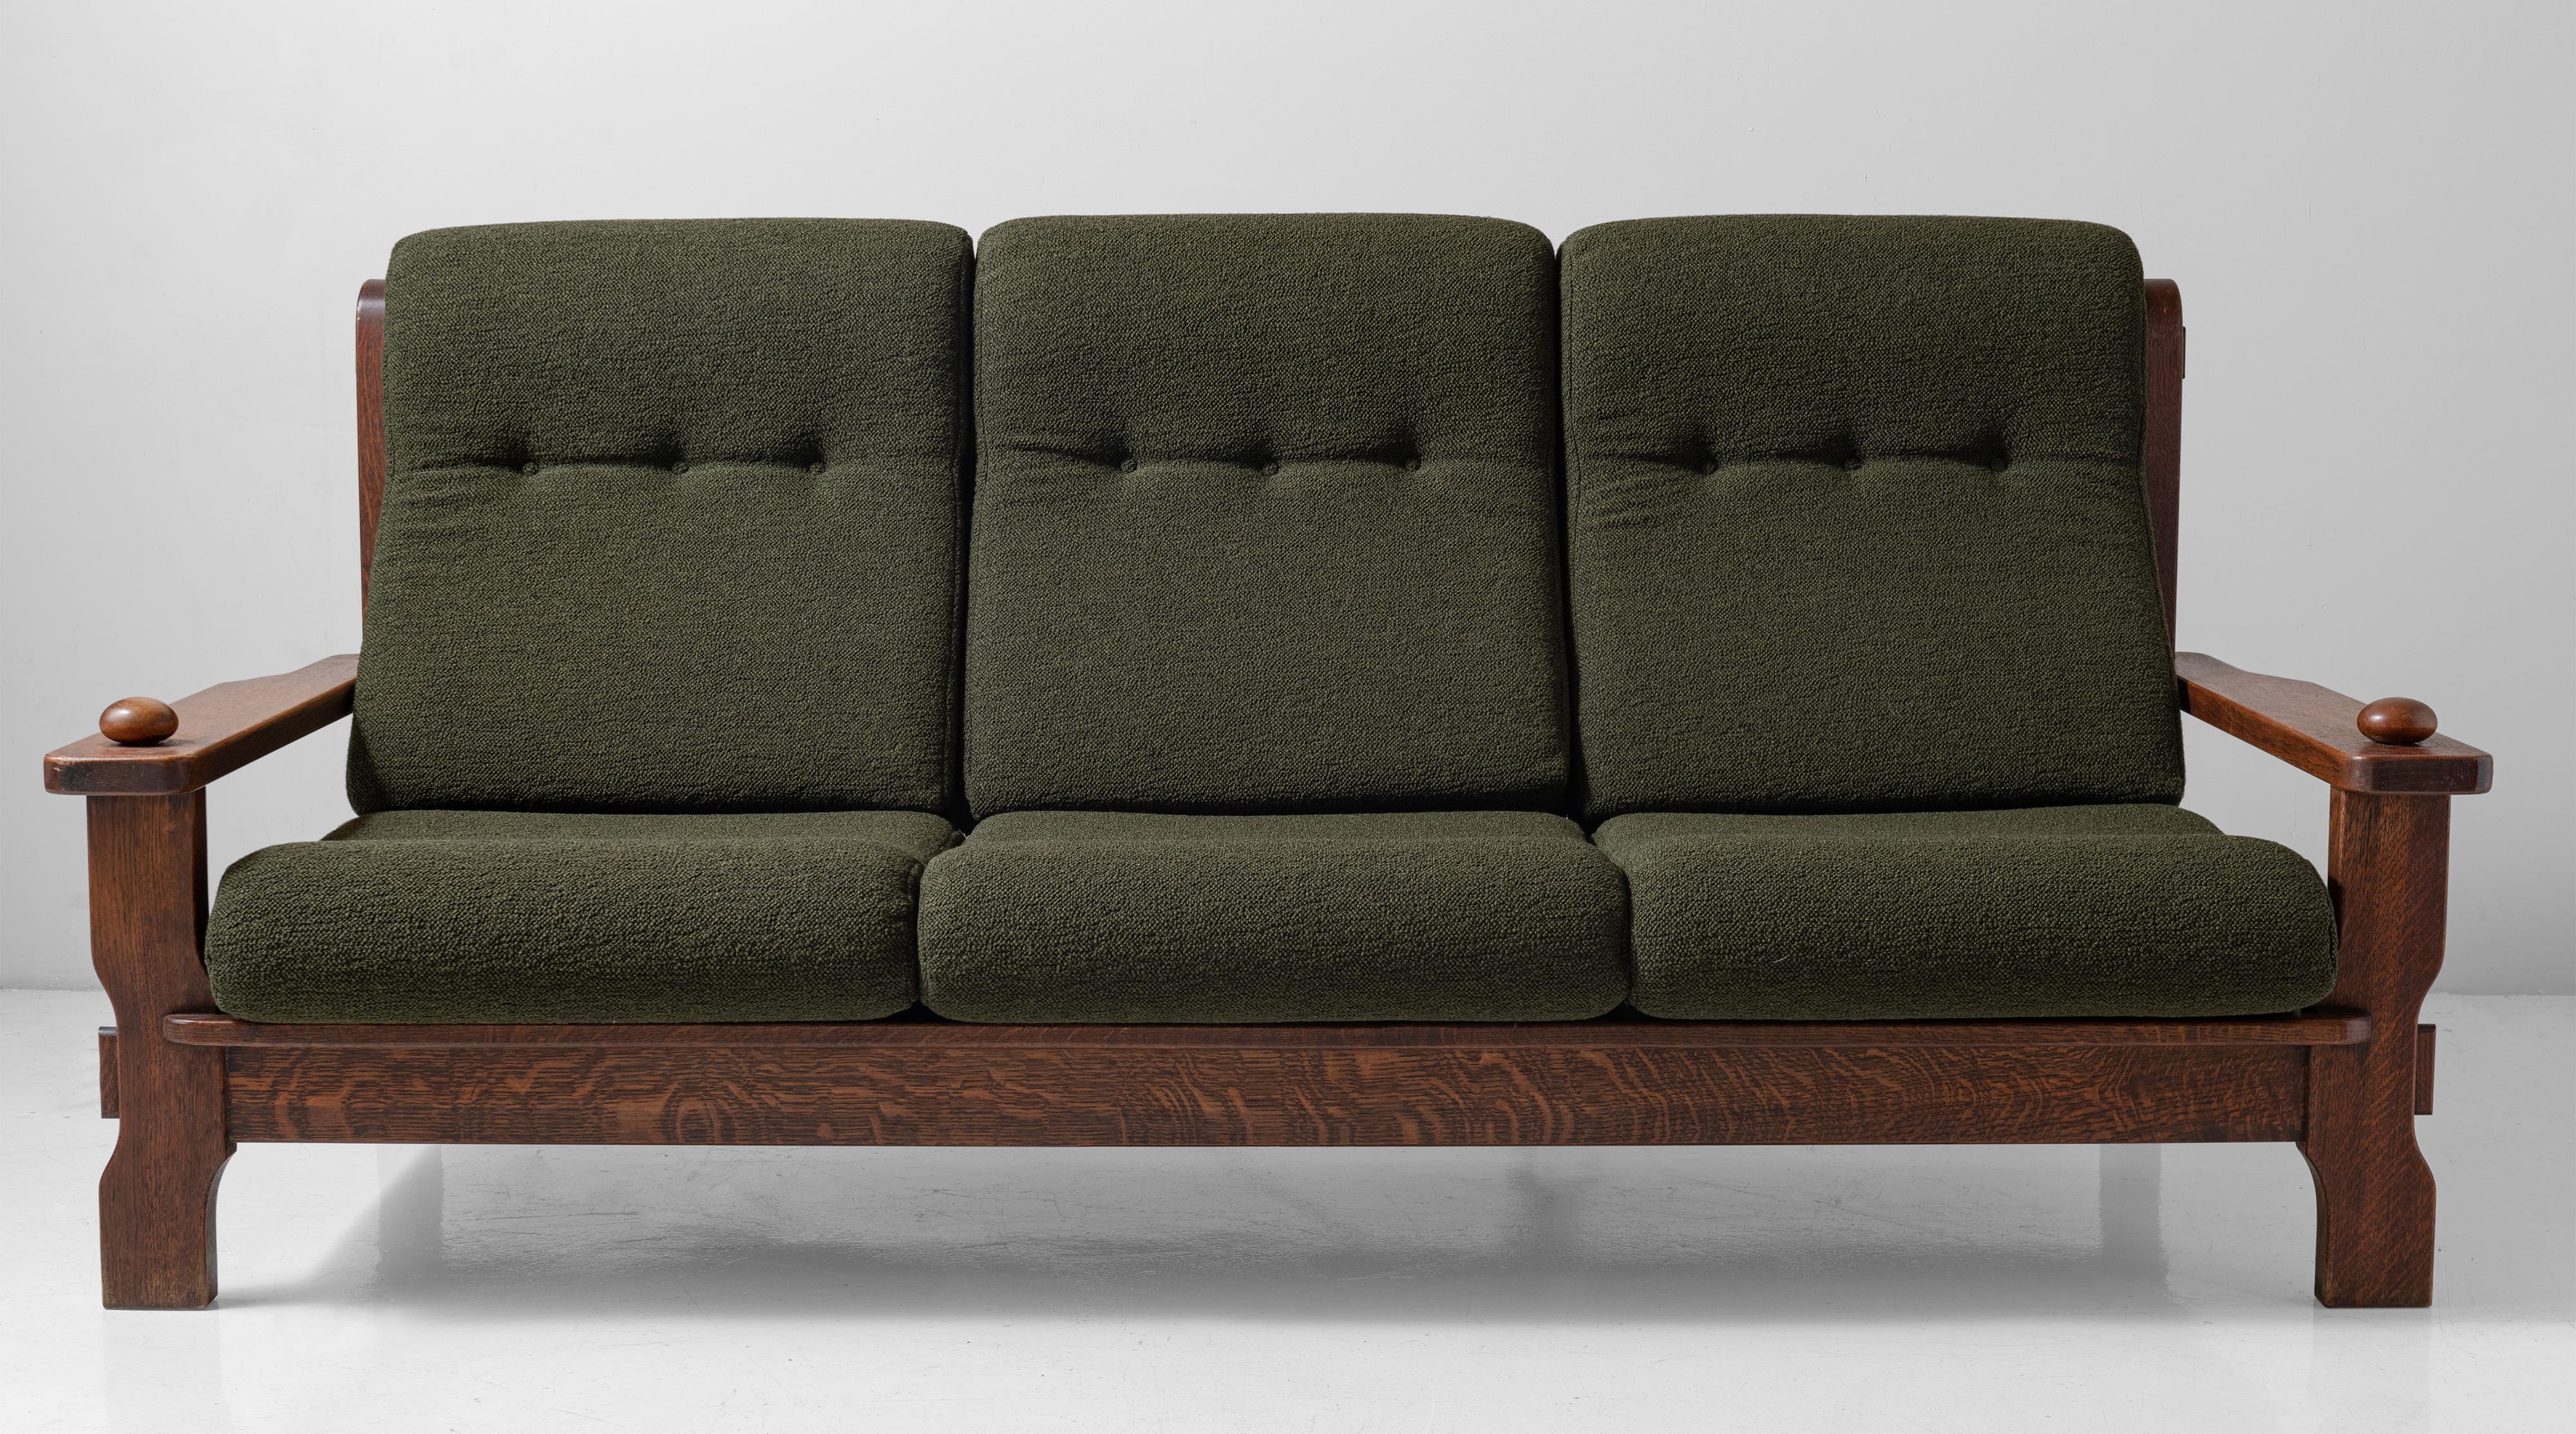 Brutalist oak sofa in textured wool blend from Maharam,

France, circa 1950

Newly upholstered. Oak construction with slatted bentwood back.